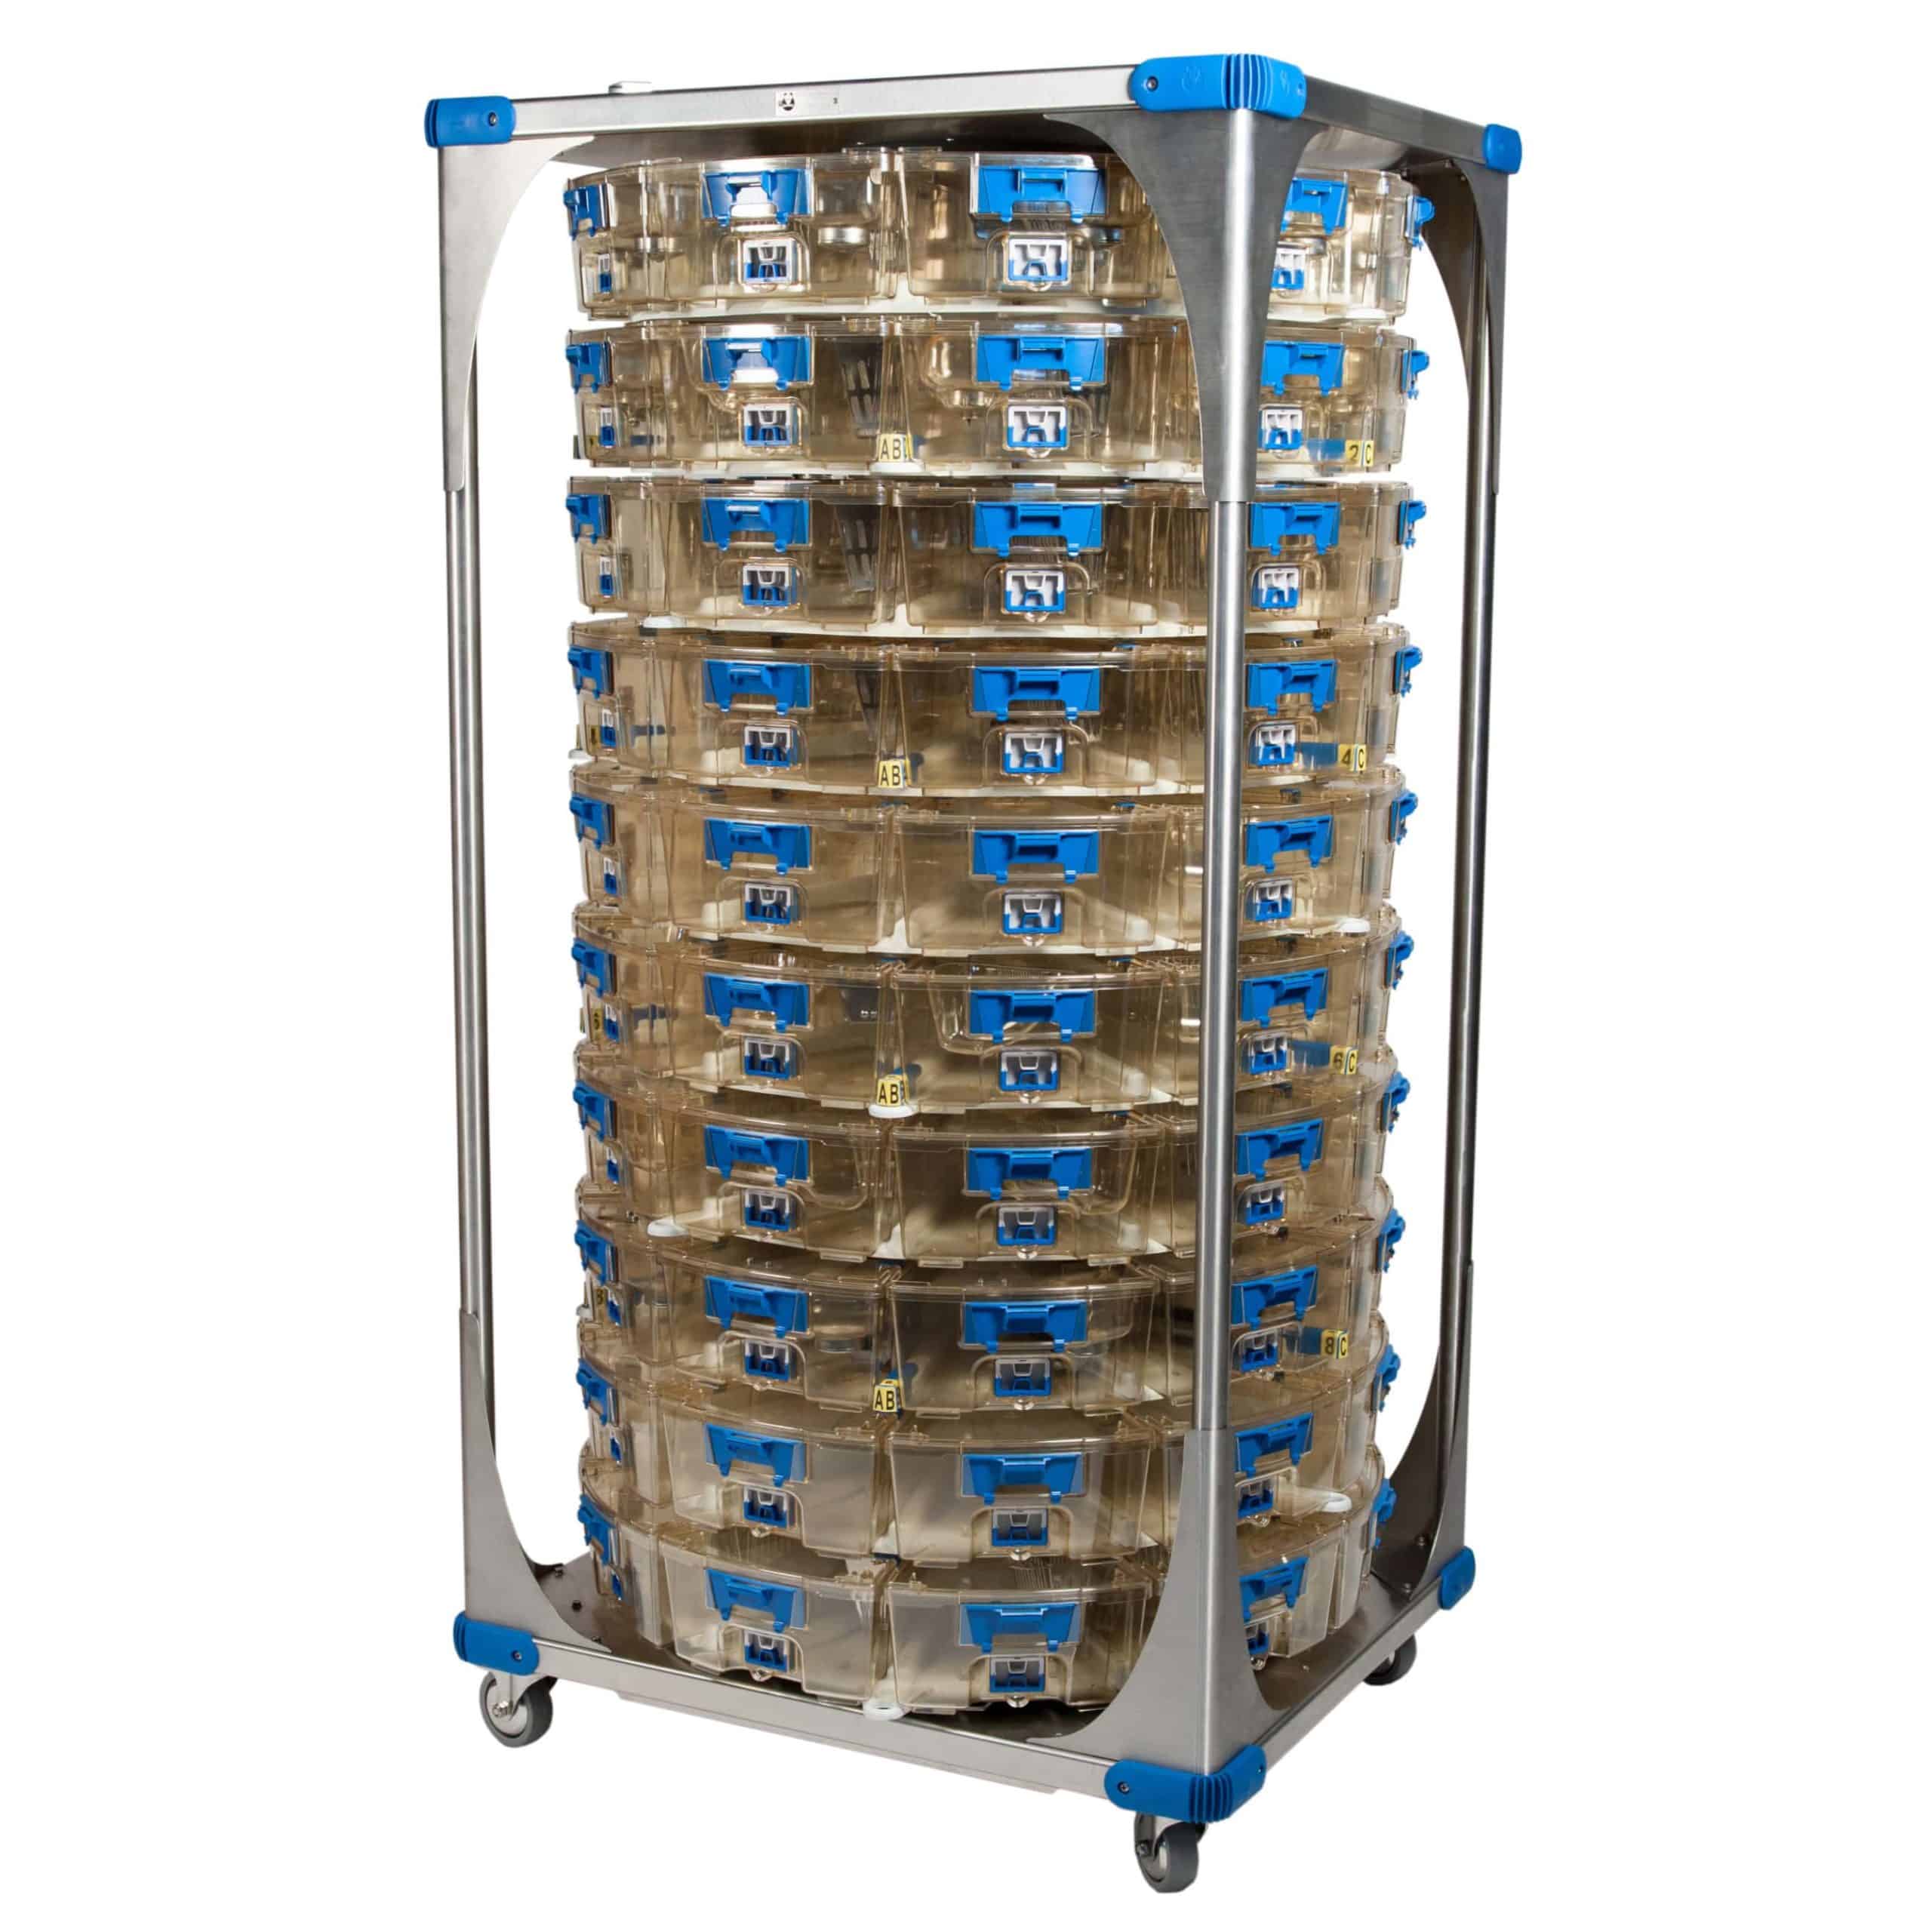 https://aresscientific.com/wp-content/uploads/2021/12/Optimice-rack-with-cages-scaled-1-scaled.jpg